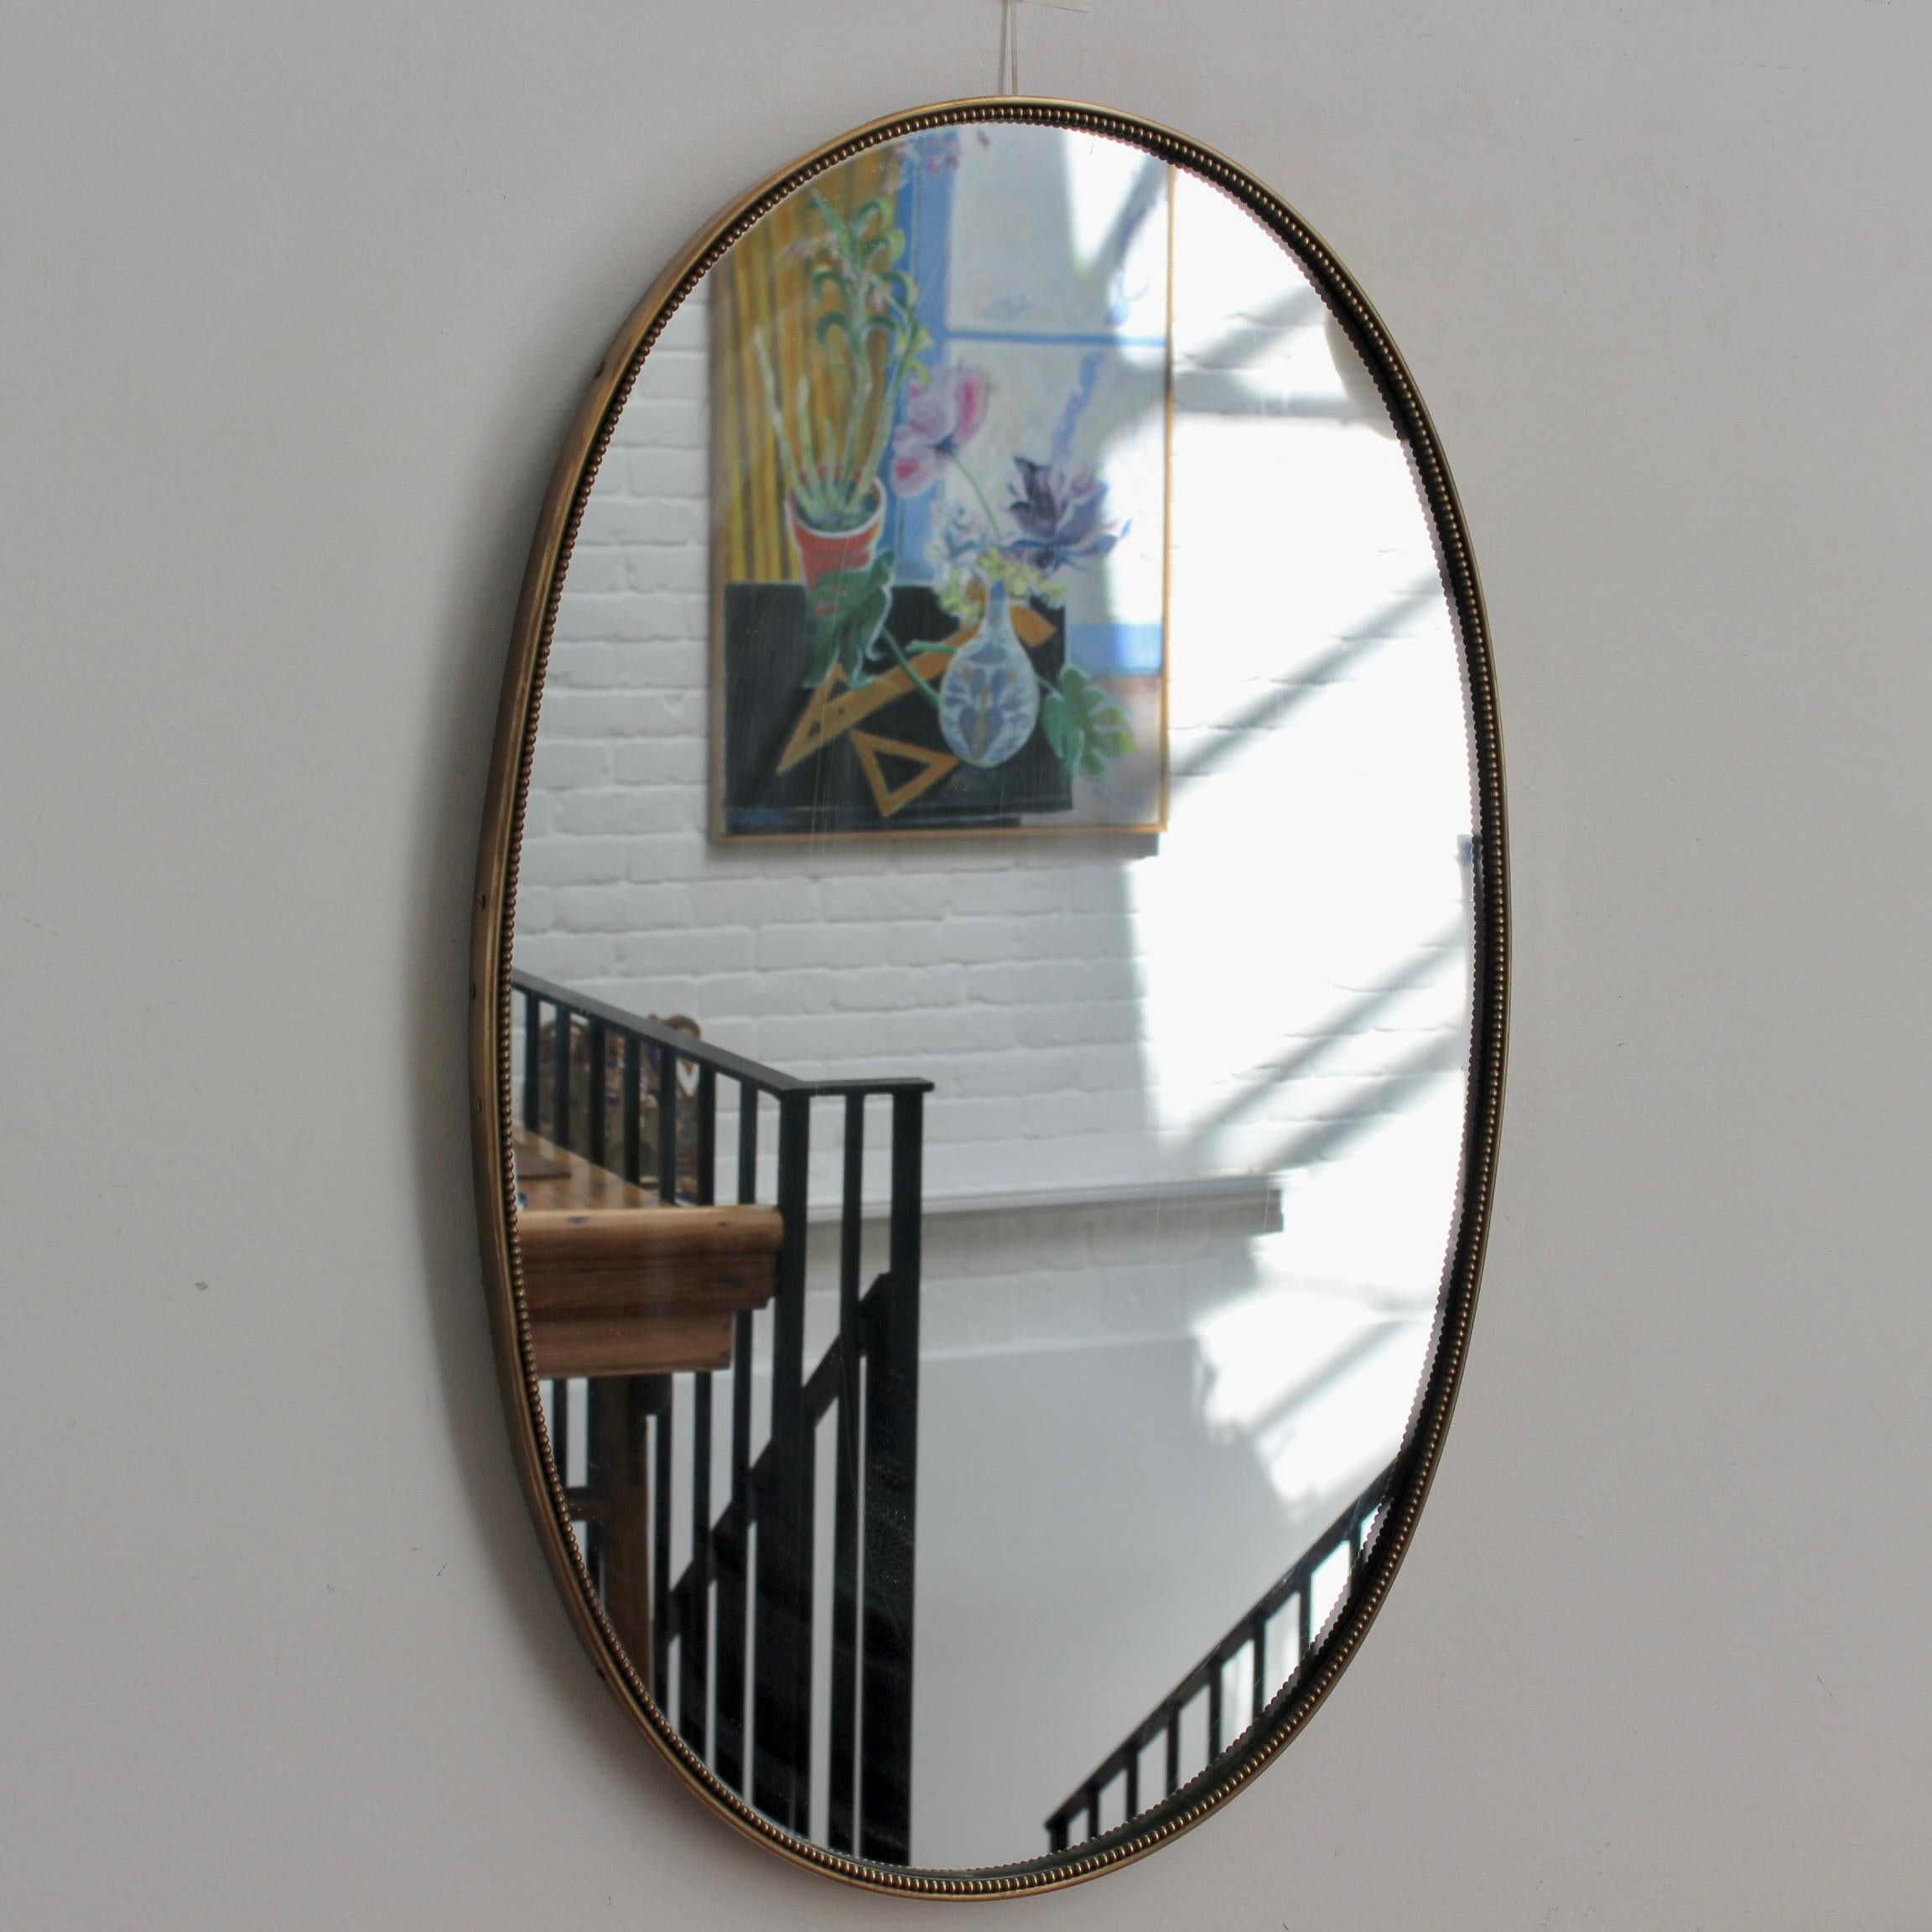 Mid-century Italian wall mirror with brass frame (circa 1950s). The mirror is oval in shape, very smart with irresistible durability. The visual impression is elegant and very unique in a modern Gio Ponti style. A distinctive beading outlines the